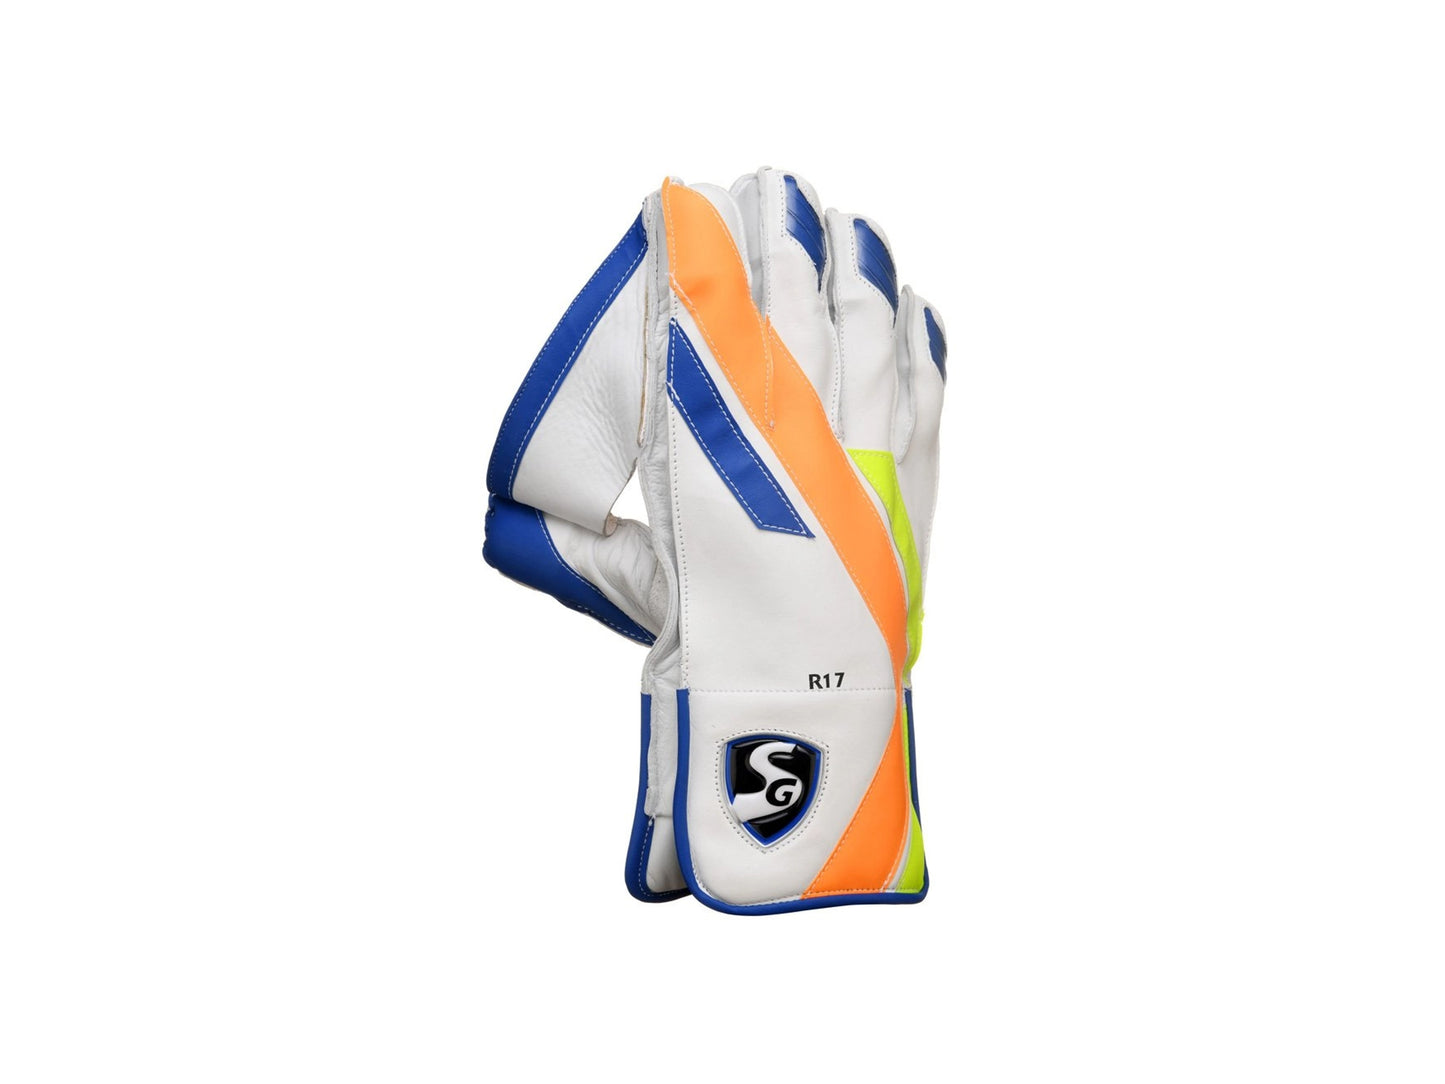 SG RP17 Wicket Keeping Gloves